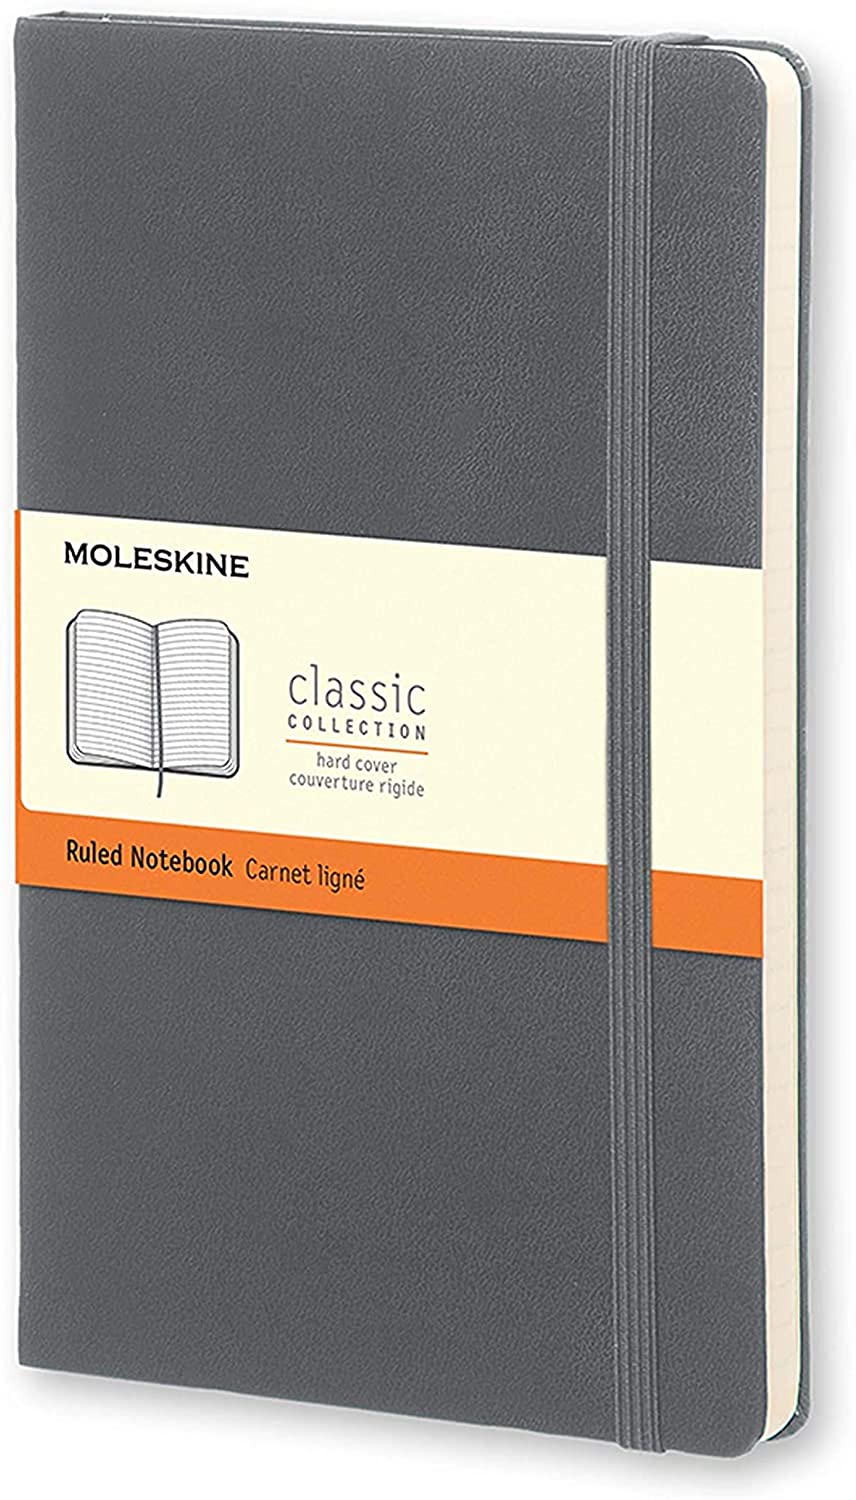 Moleskine Classic Notebook Grey for online shopping in Pakistan at Chapters